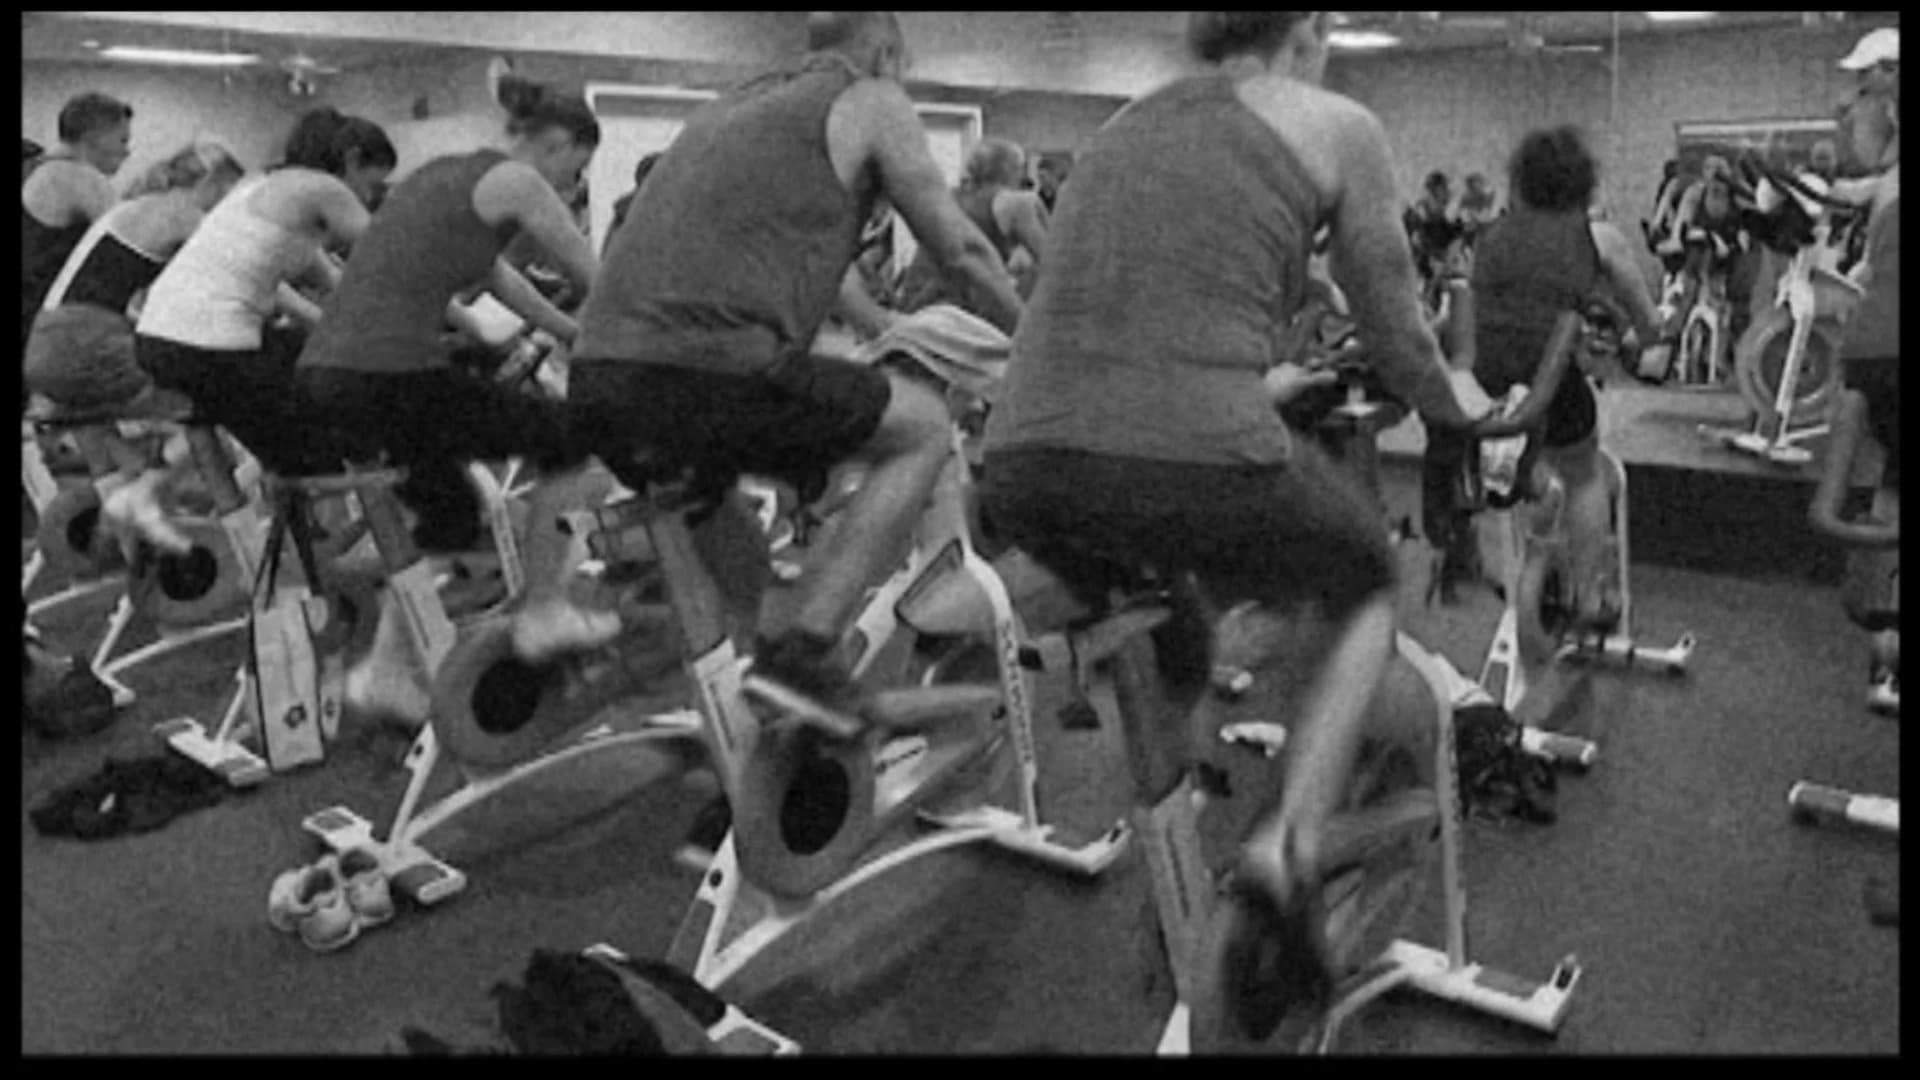 Consumer Alert: Gym membership contracts